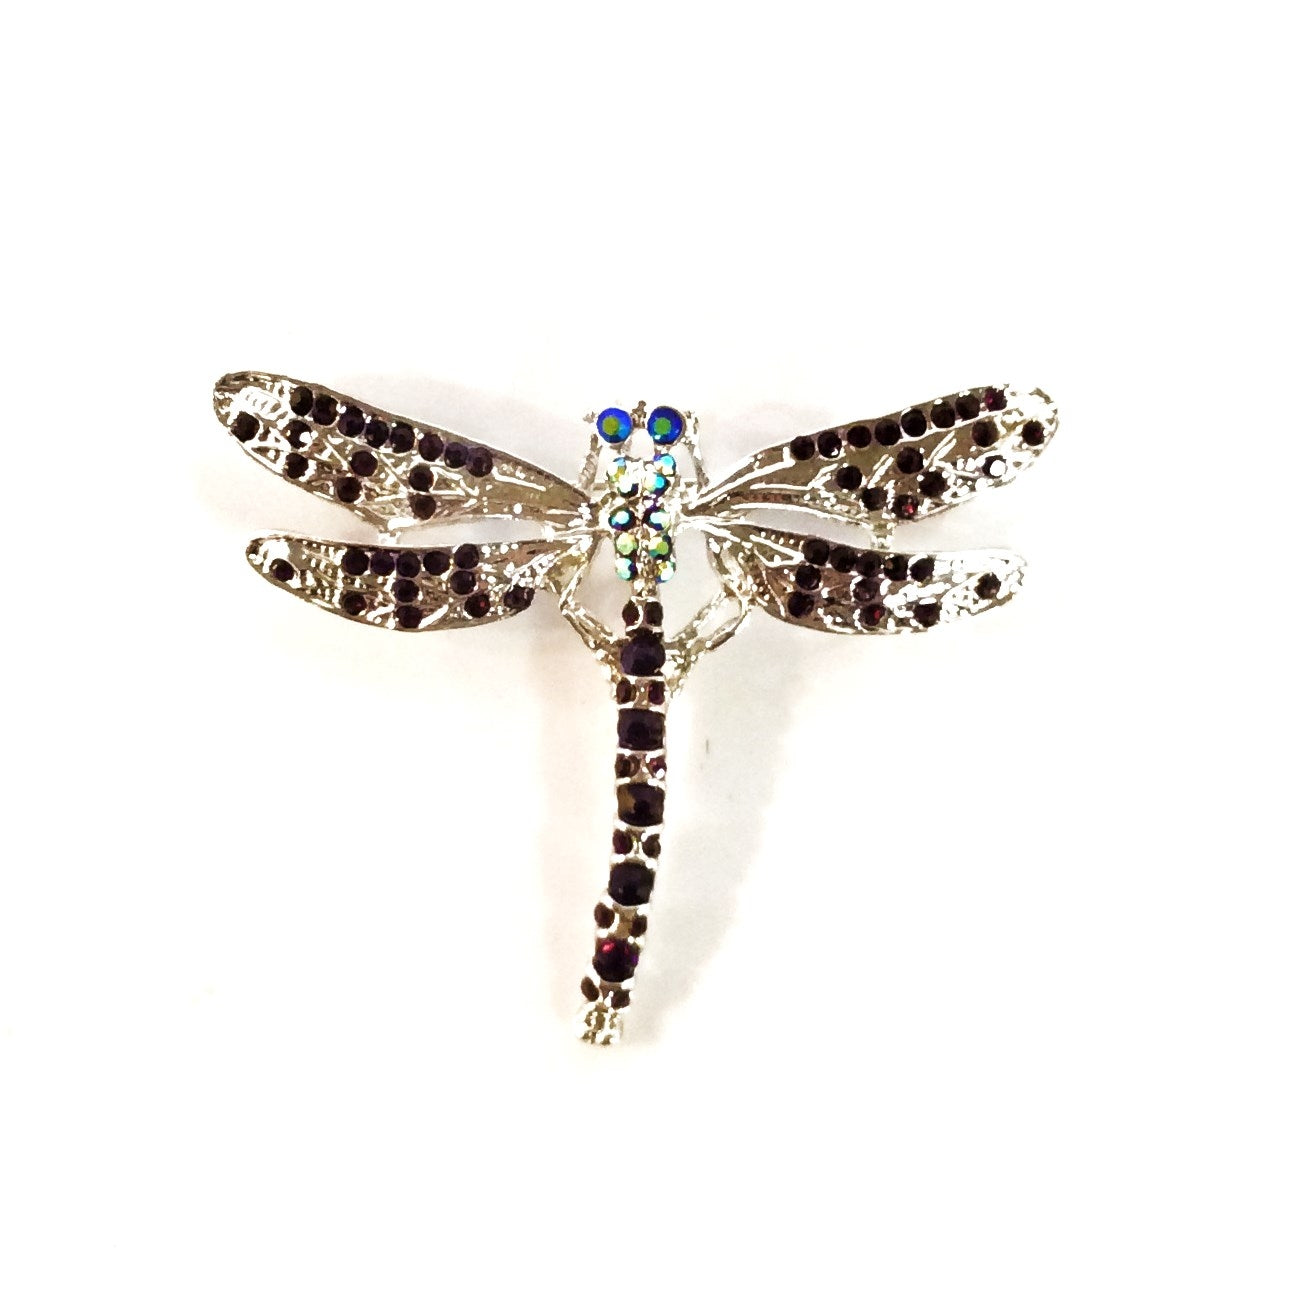 Dragonfly Pin #28-111151PP (Purple)